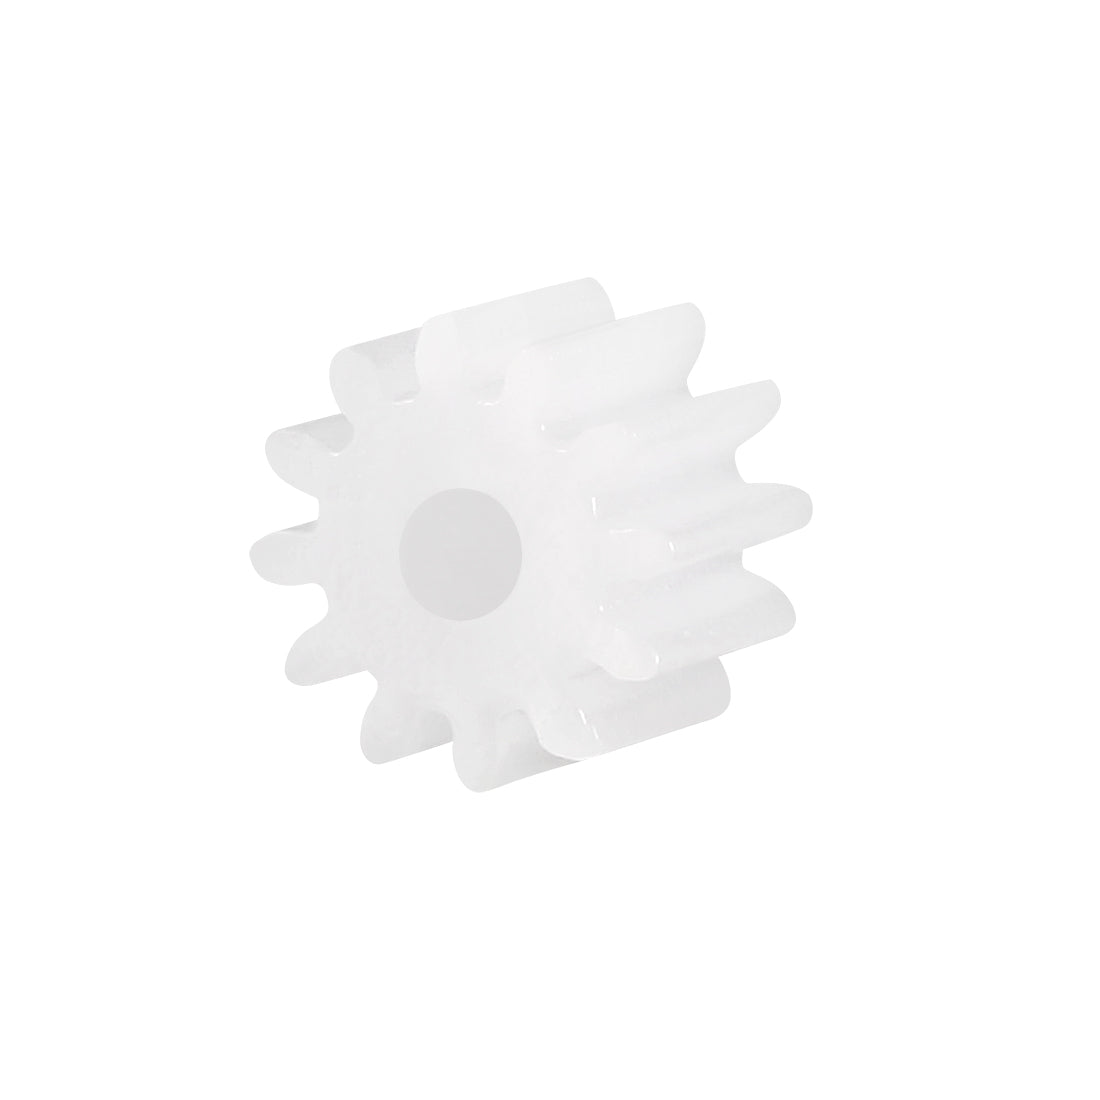 uxcell Uxcell 10Pcs 122A Plastic Gear Accessories with 12 Teeth for DIY Car Robot Motor